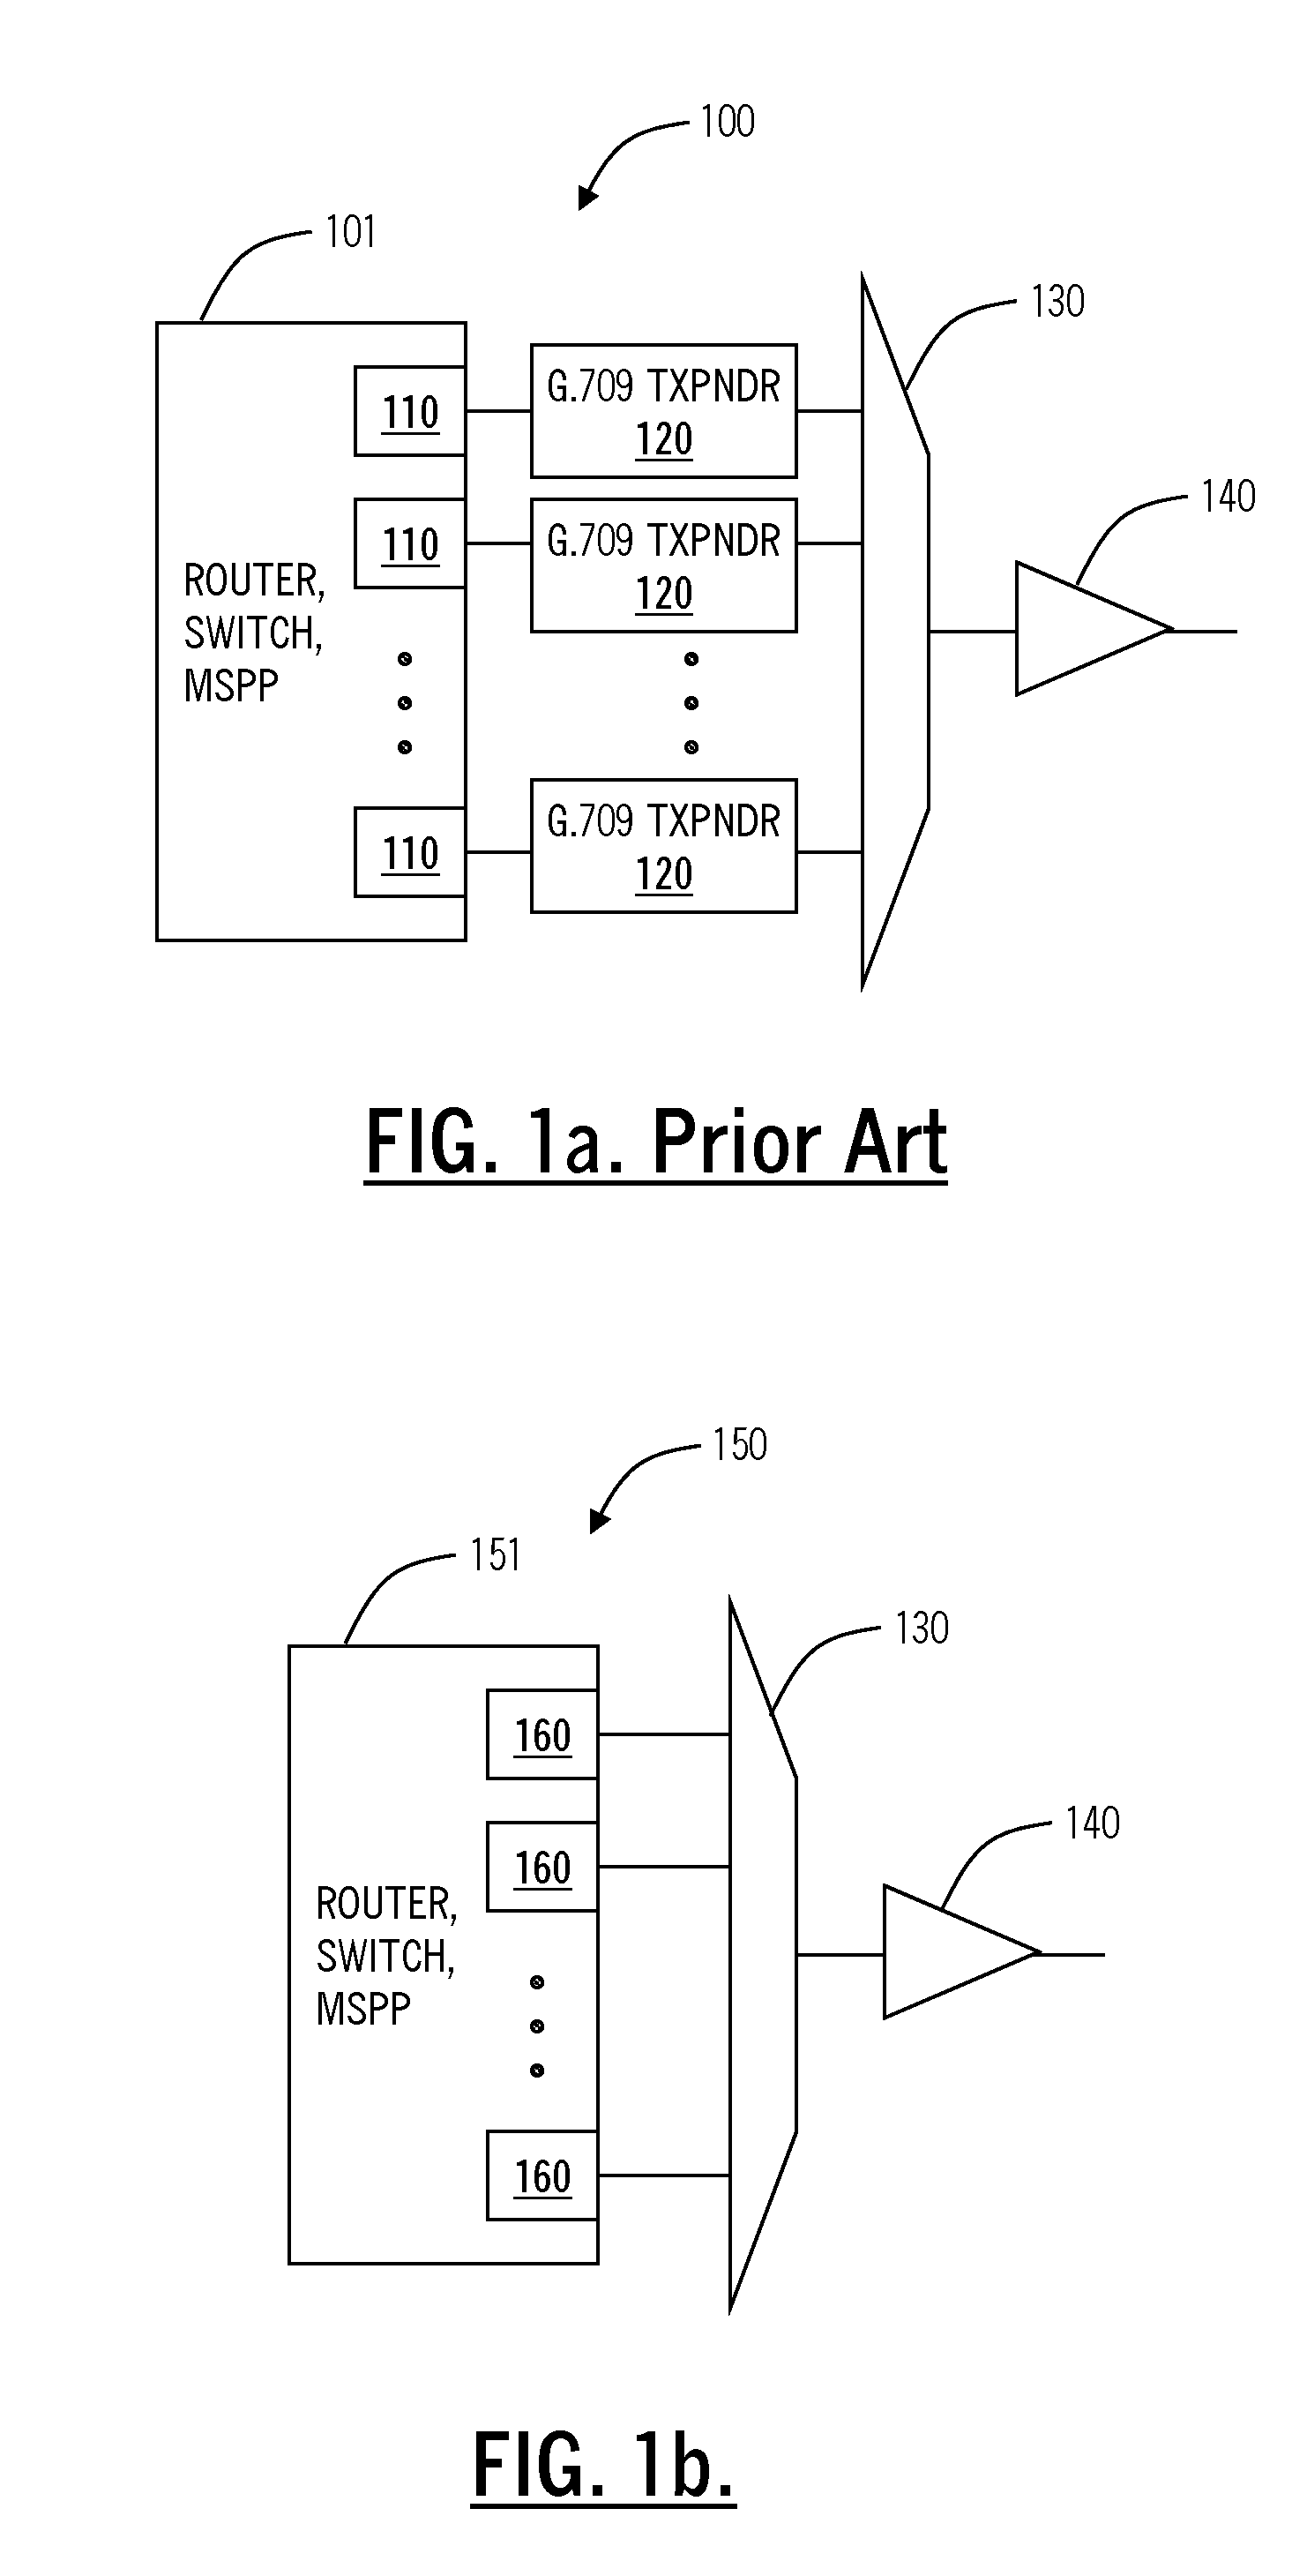 Pluggable optical transceivers with integrated electronic dispersion compensation